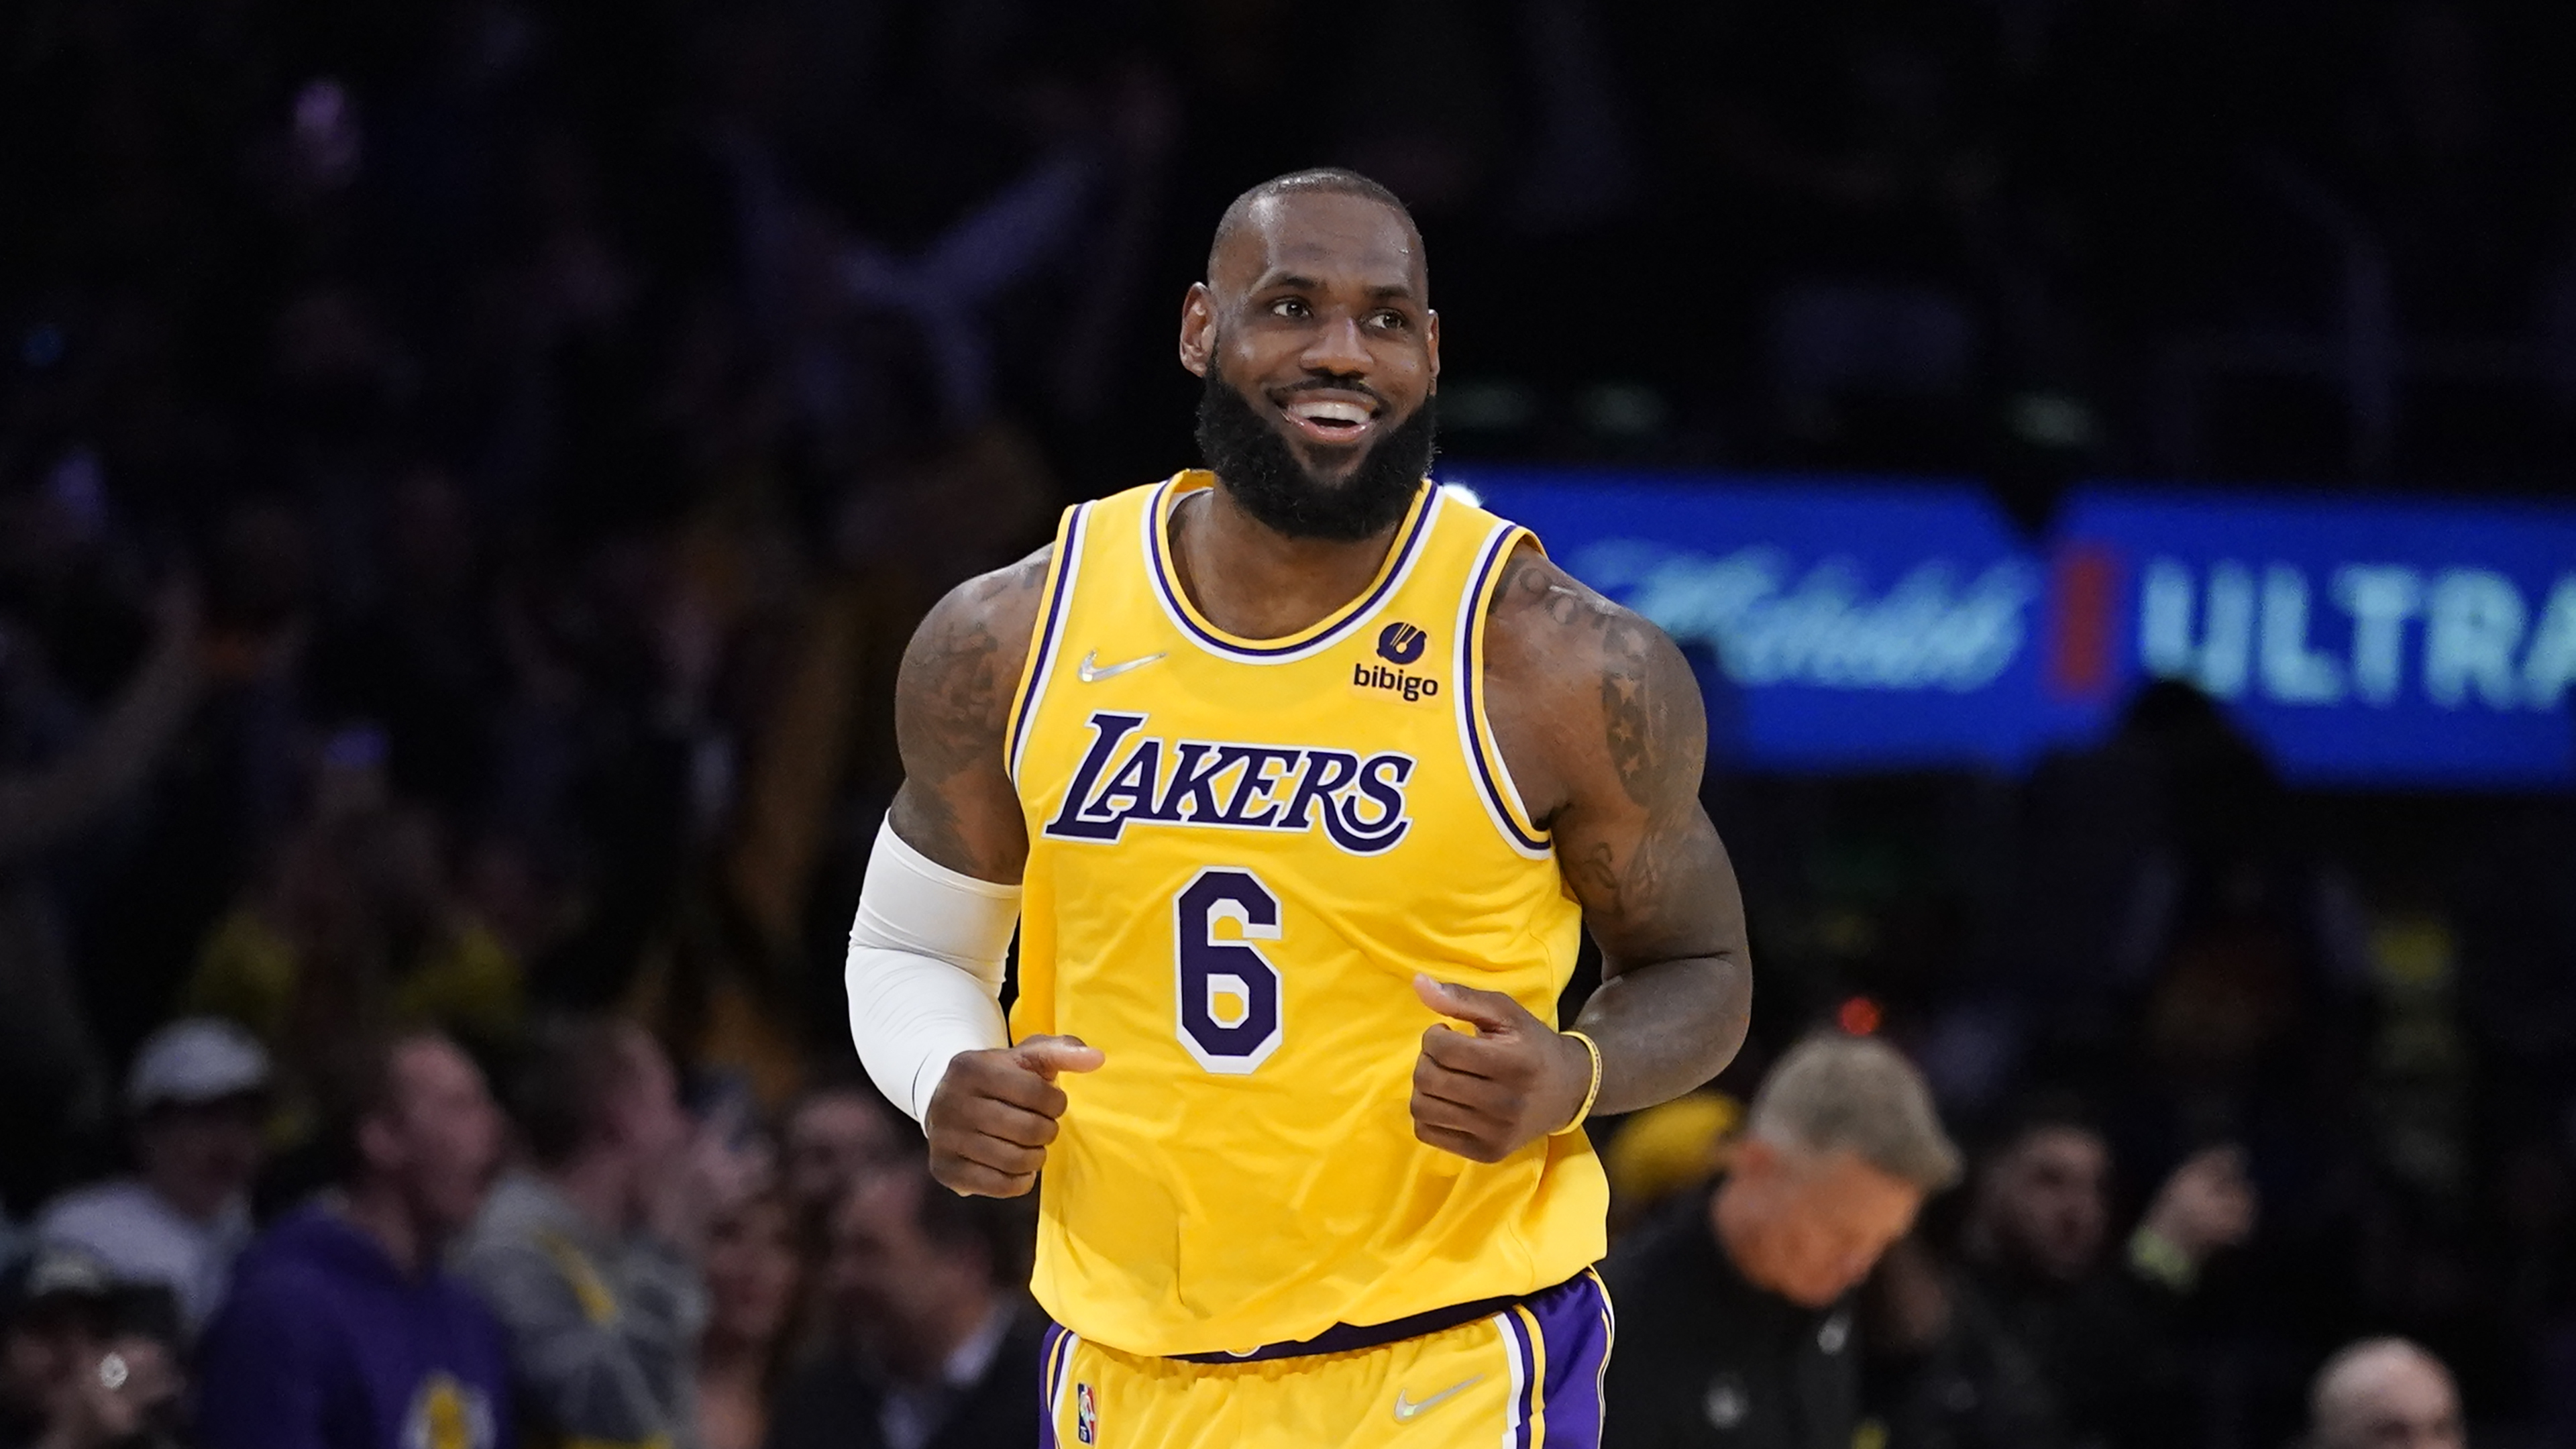 Lebron James' contract situation with the Lakers: salary, years